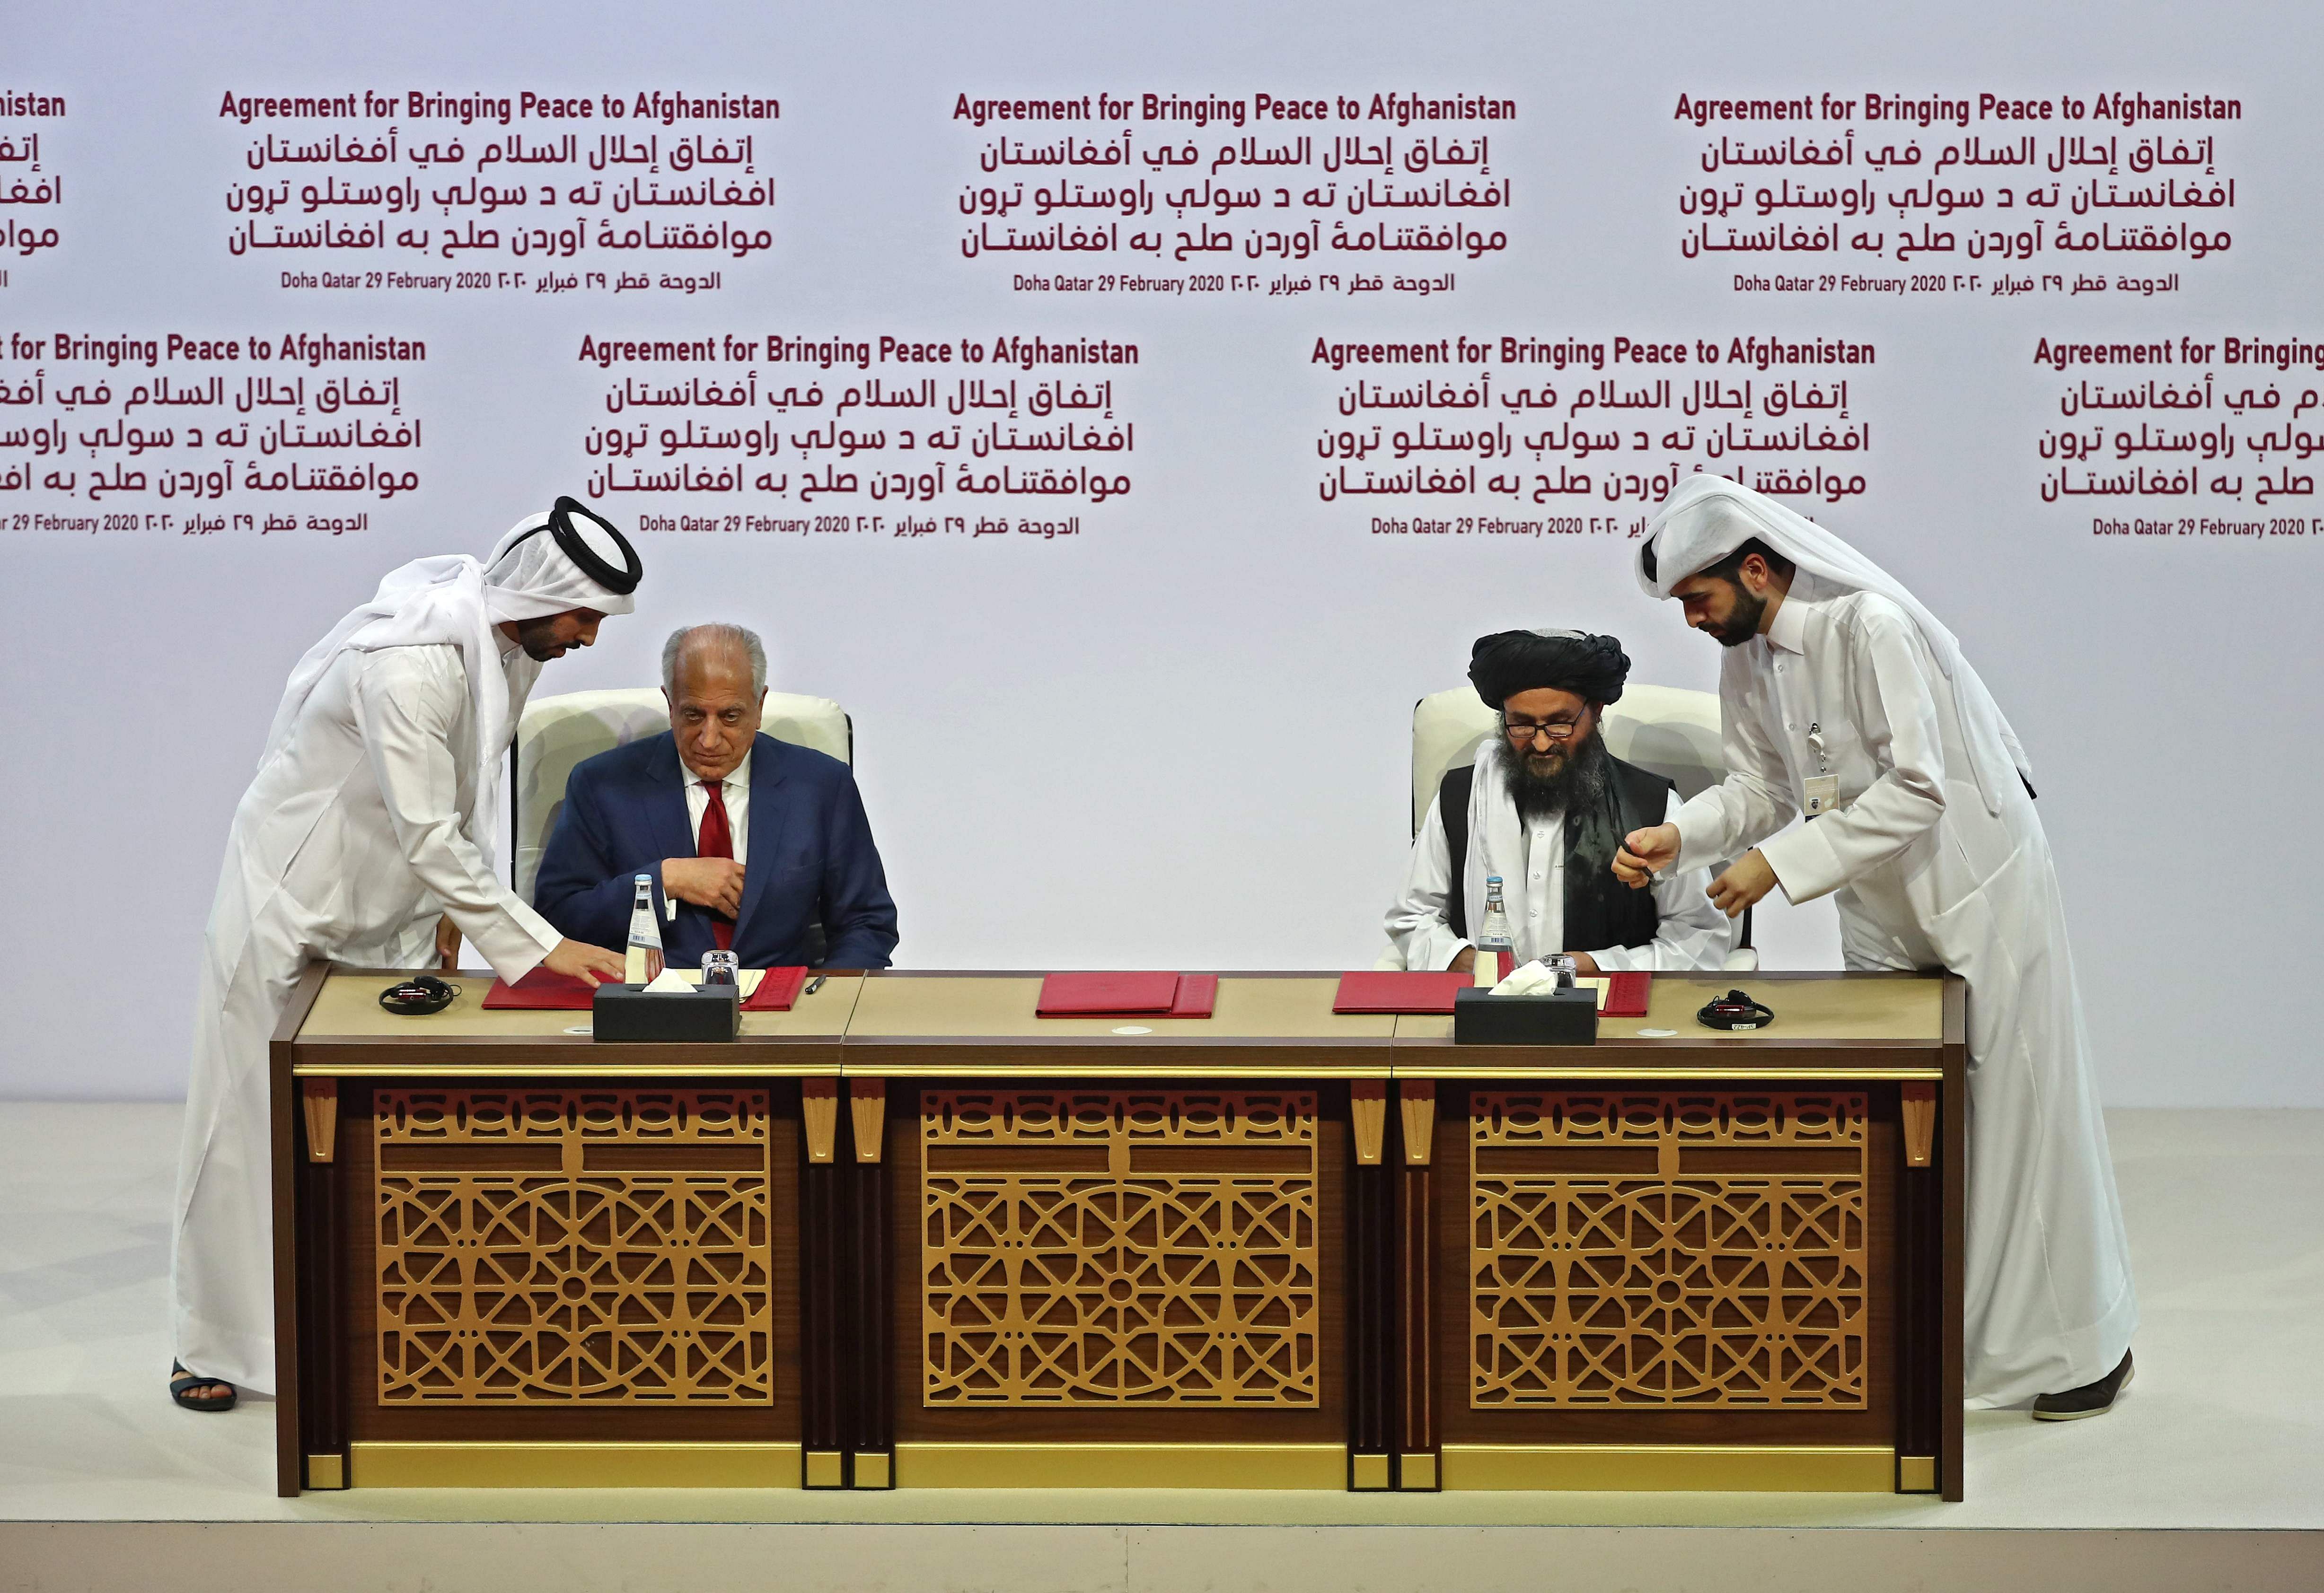 US Special Representative for Afghanistan Reconciliation Zalmay Khalilzad and Taliban co-founder Mullah Abdul Ghani Baradar sign the US-Taliban peace agreement during a ceremony in the Qatari capital Doha on February 29, 2020. (Credit: AFP Photo)